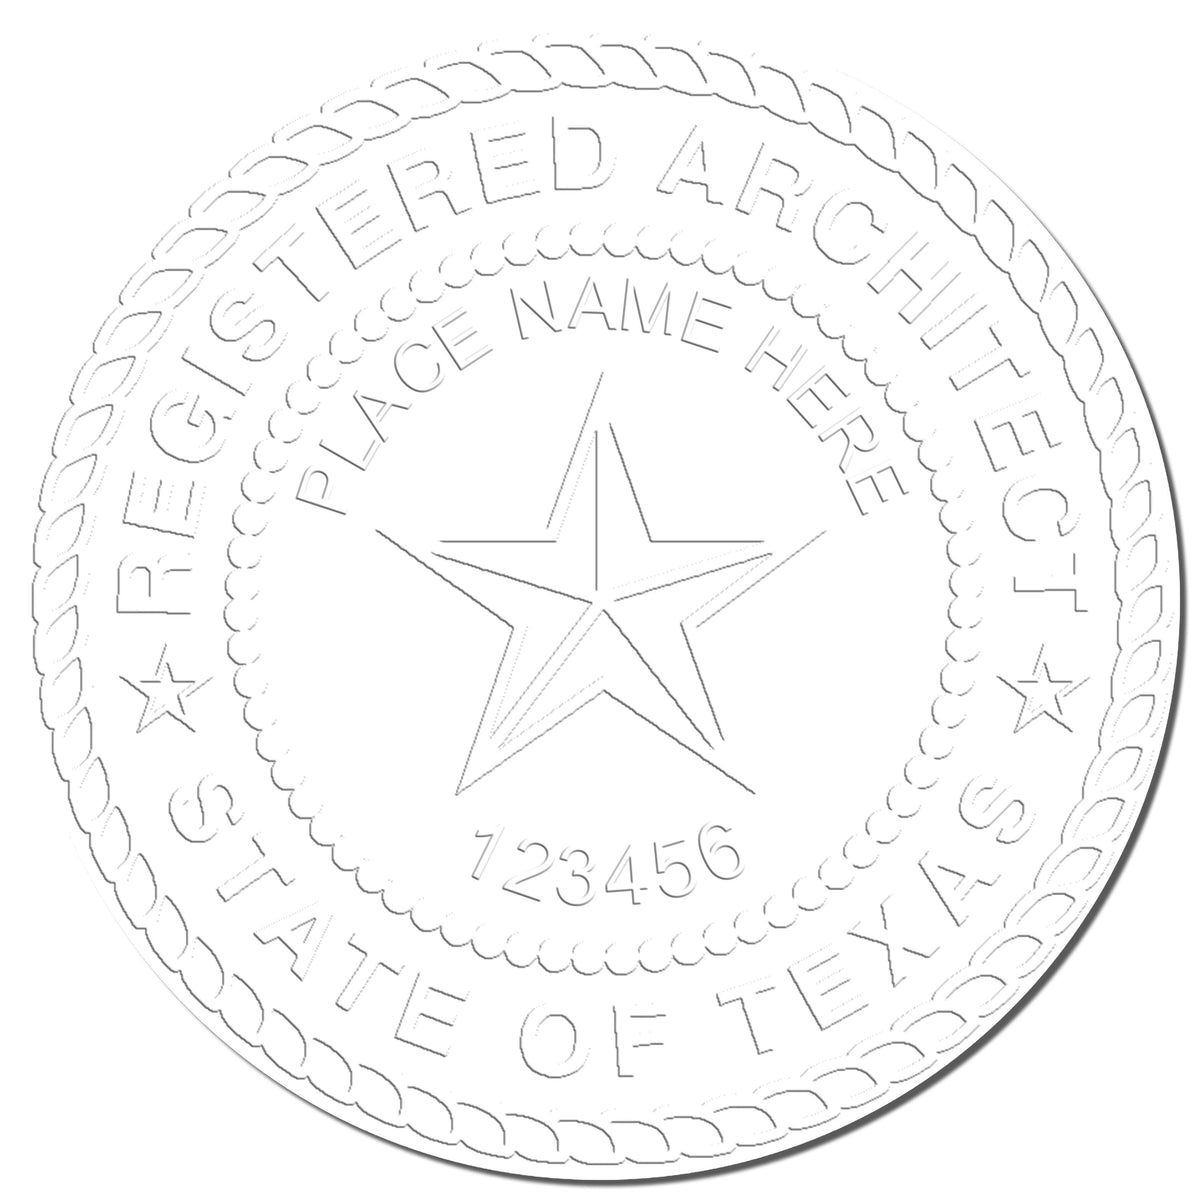 This paper is stamped with a sample imprint of the Hybrid Texas Architect Seal, signifying its quality and reliability.